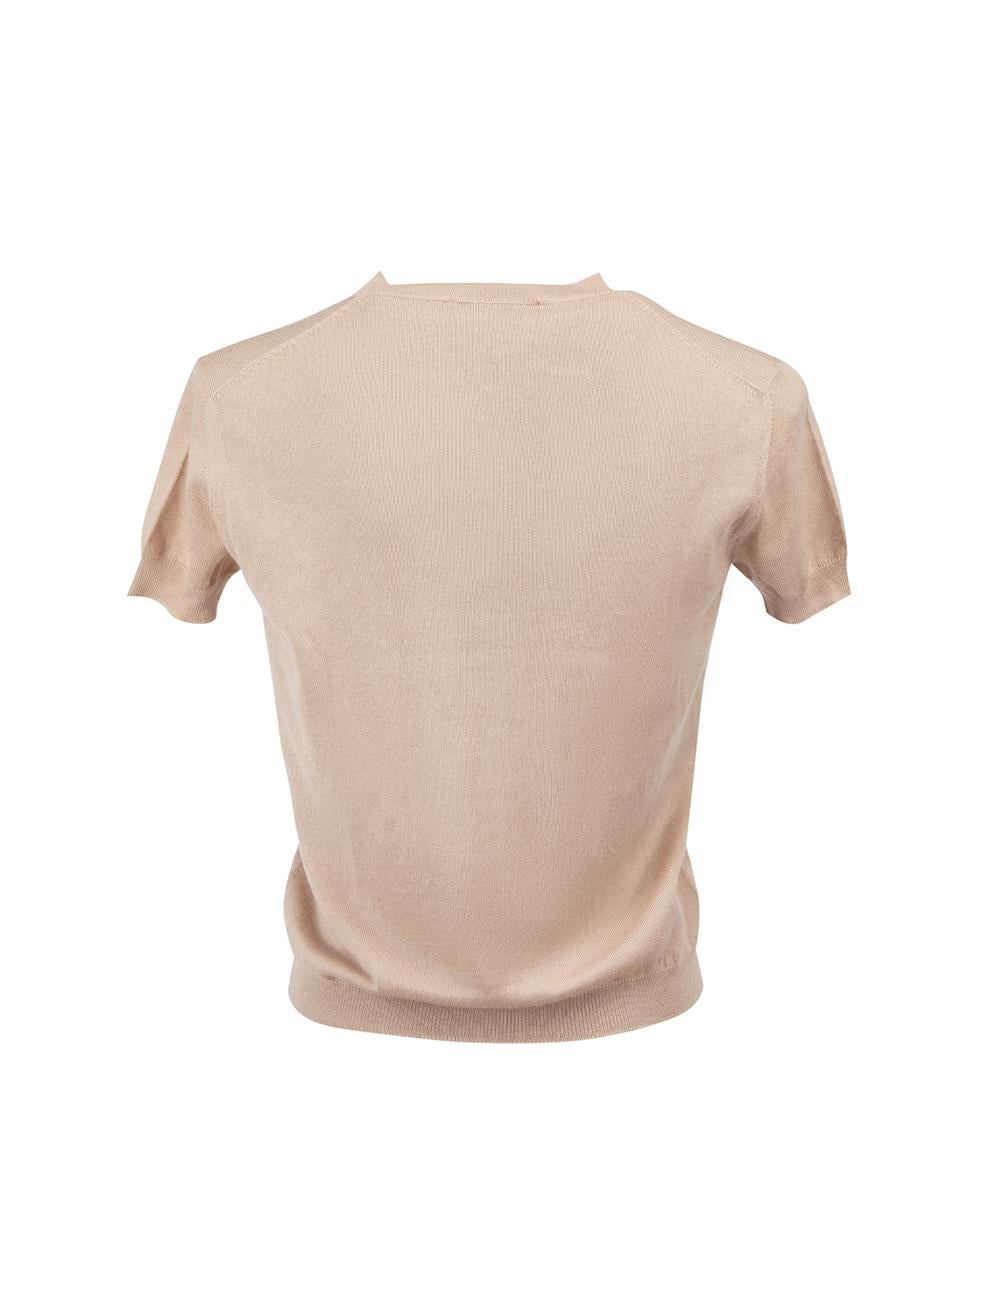 Christian Dior Beige Embroidered Cashmere Knit Top Size XS In Good Condition For Sale In London, GB